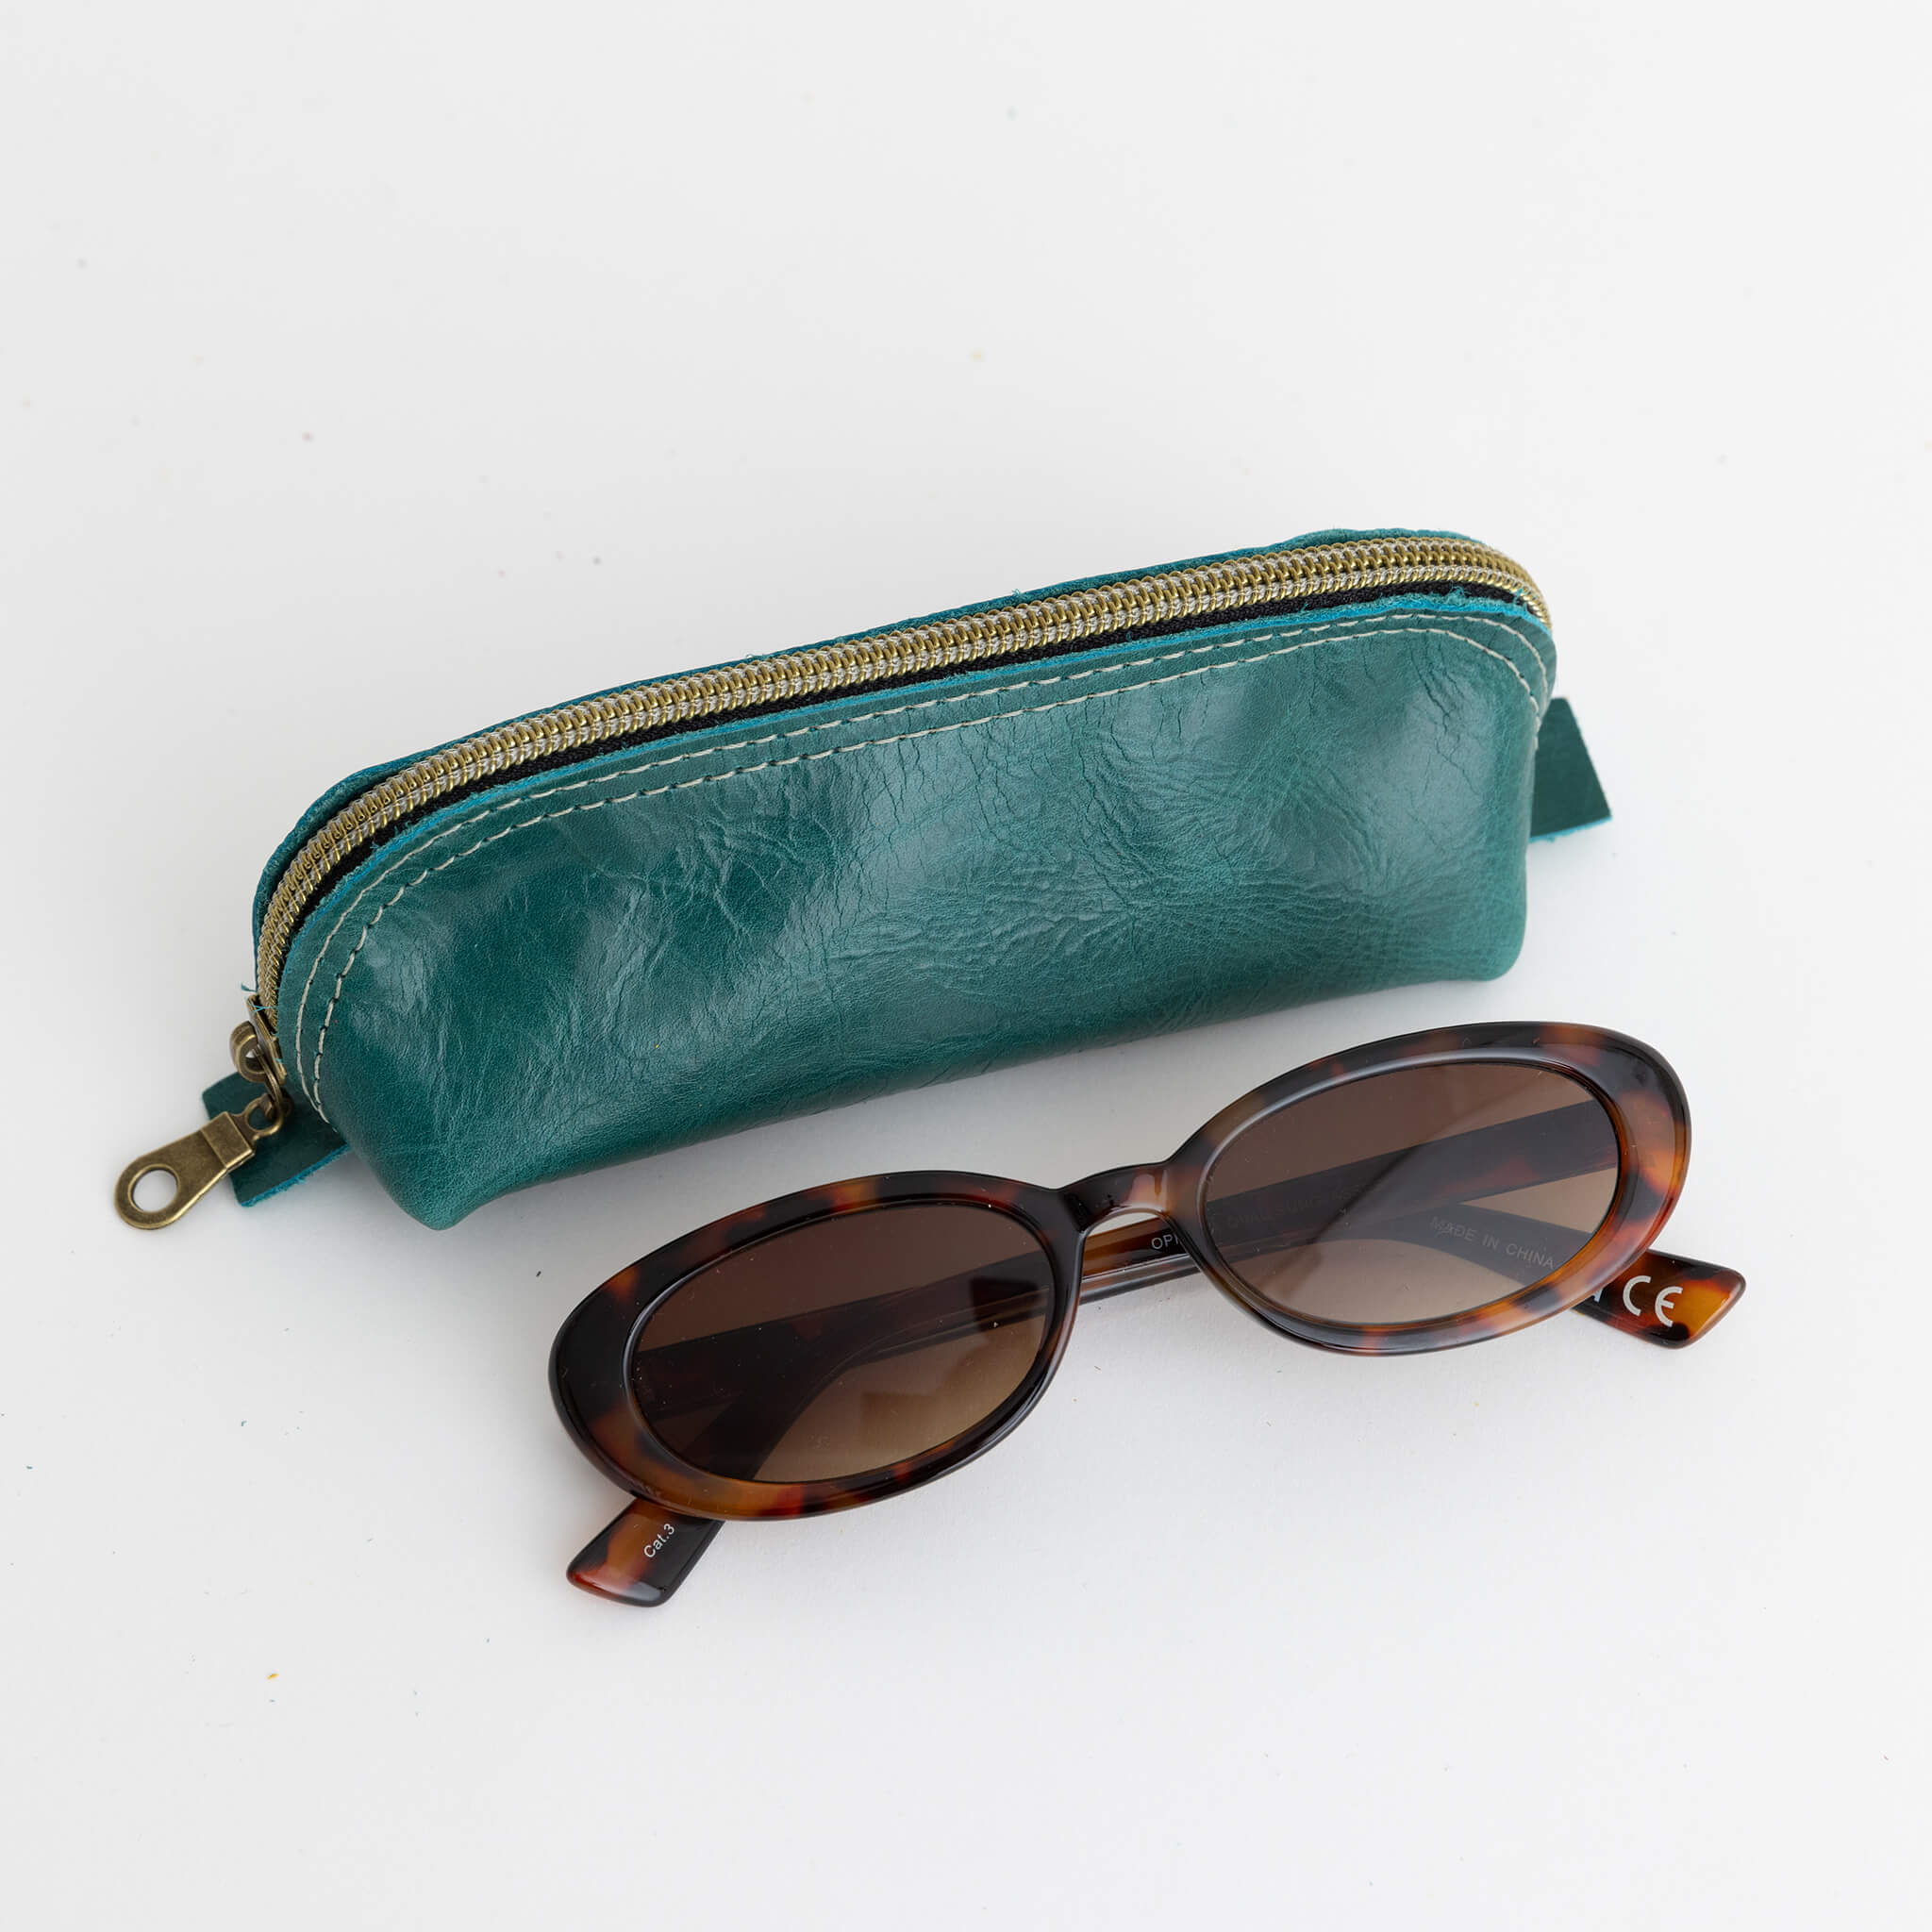 shelby pouch - zipper case - handmade leather - ocean front view